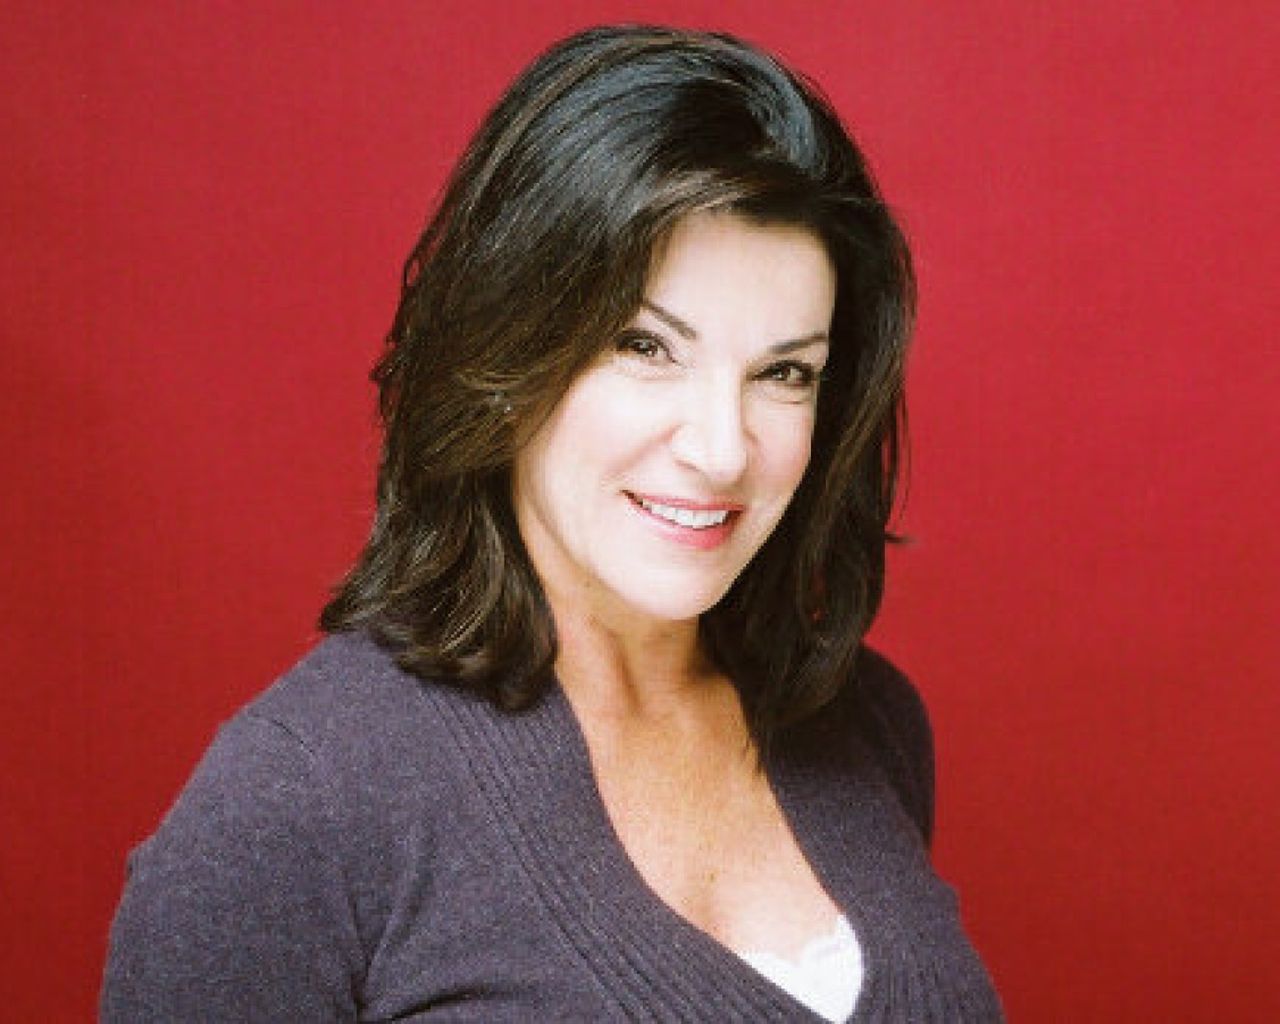 Hilary Farr Plastic Surgery and Body Measurements